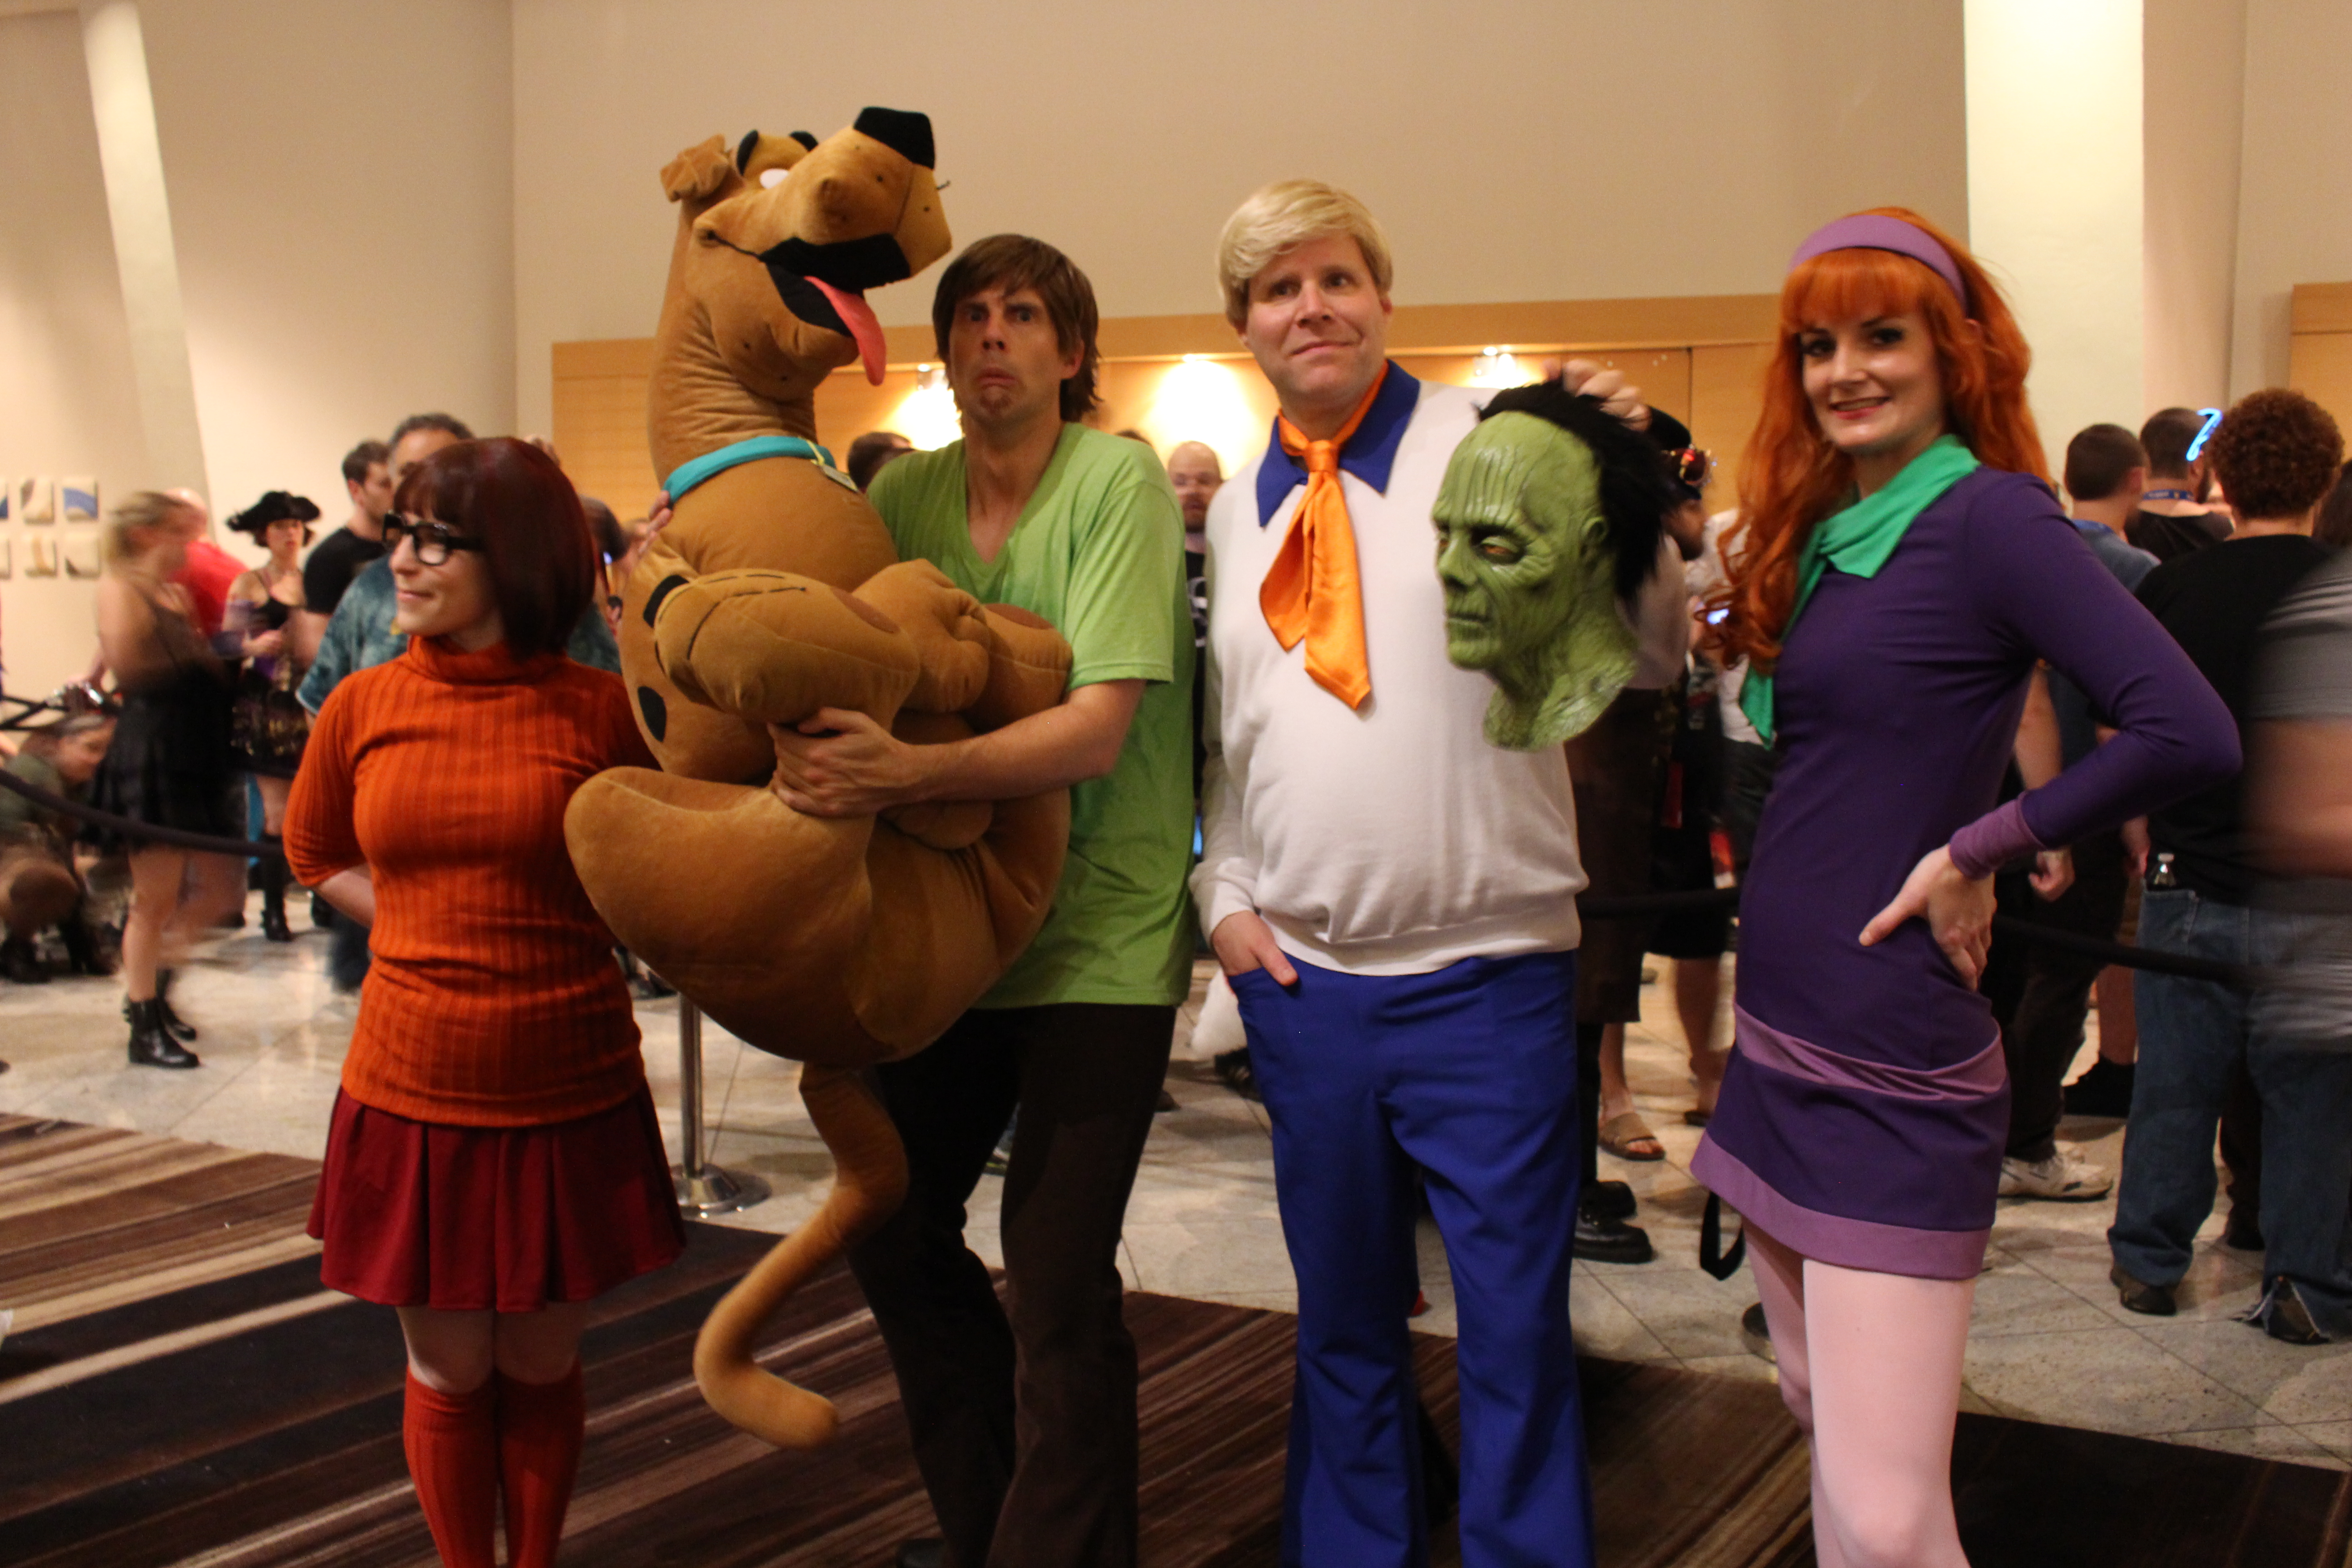 In the accuracy category, you would have to include this Scooby Doo cosplay...